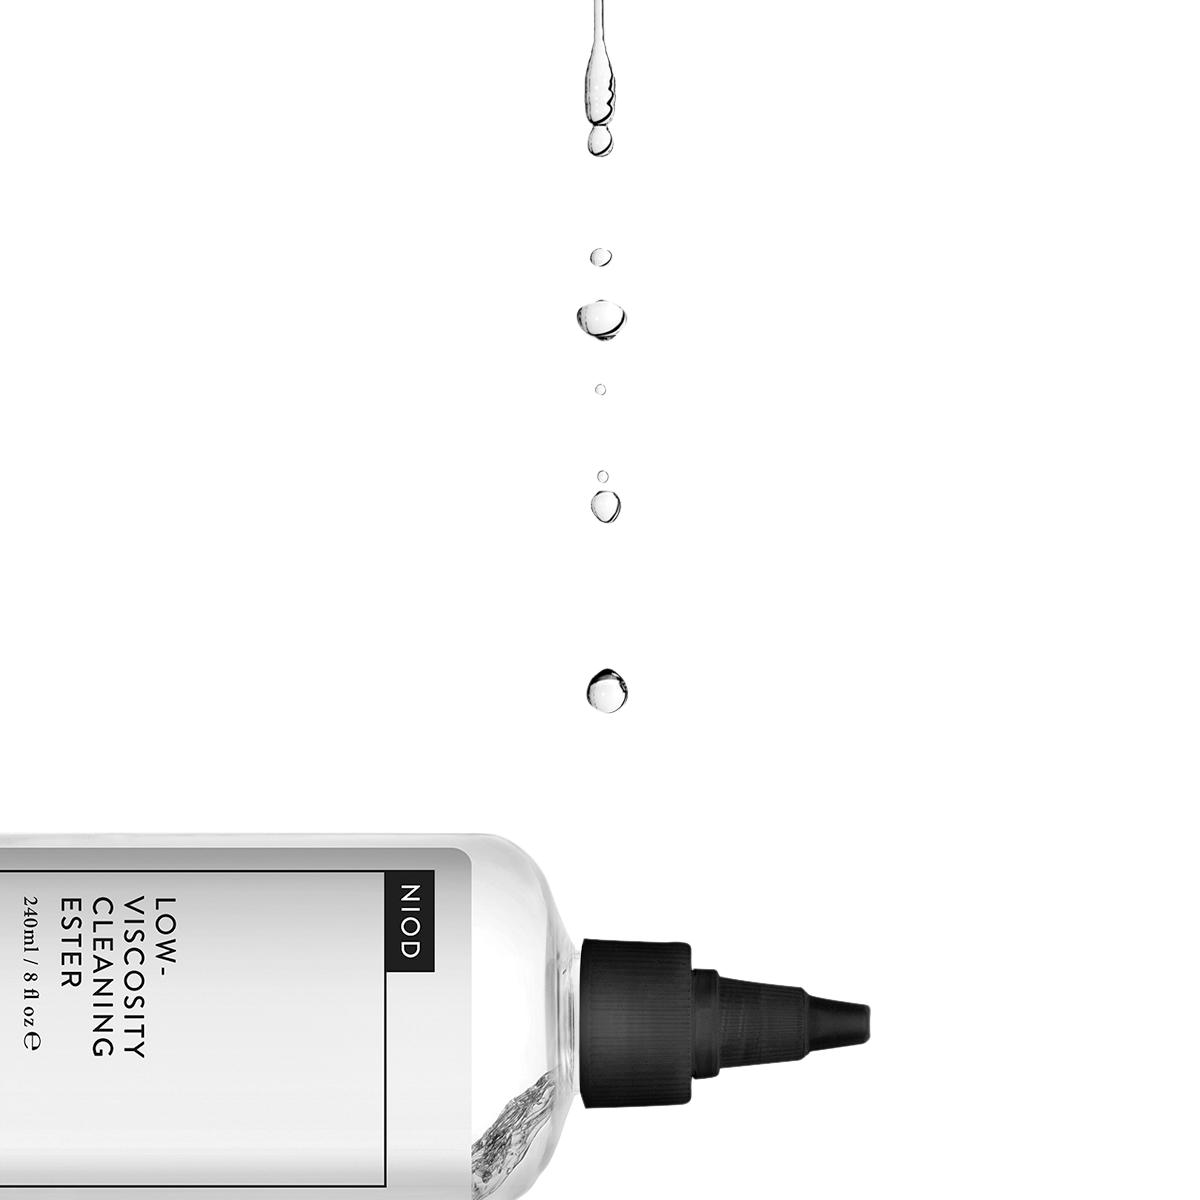 NIOD - Low-Viscosity Cleaning Ester